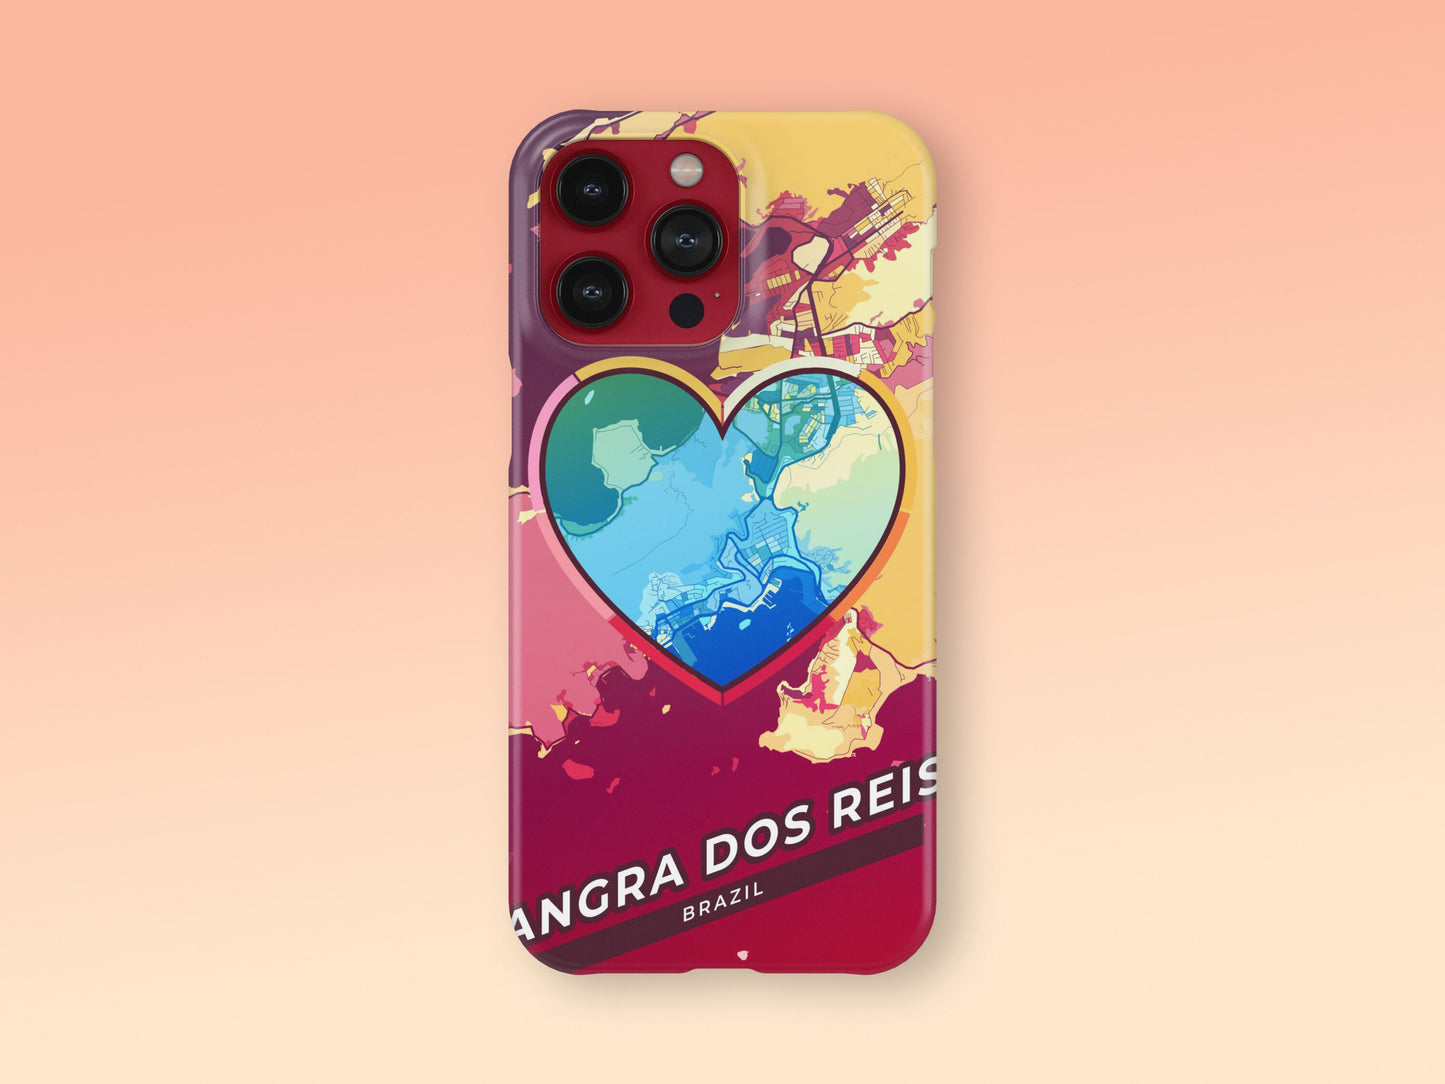 Angra Dos Reis Brazil slim phone case with colorful icon. Birthday, wedding or housewarming gift. Couple match cases. 2